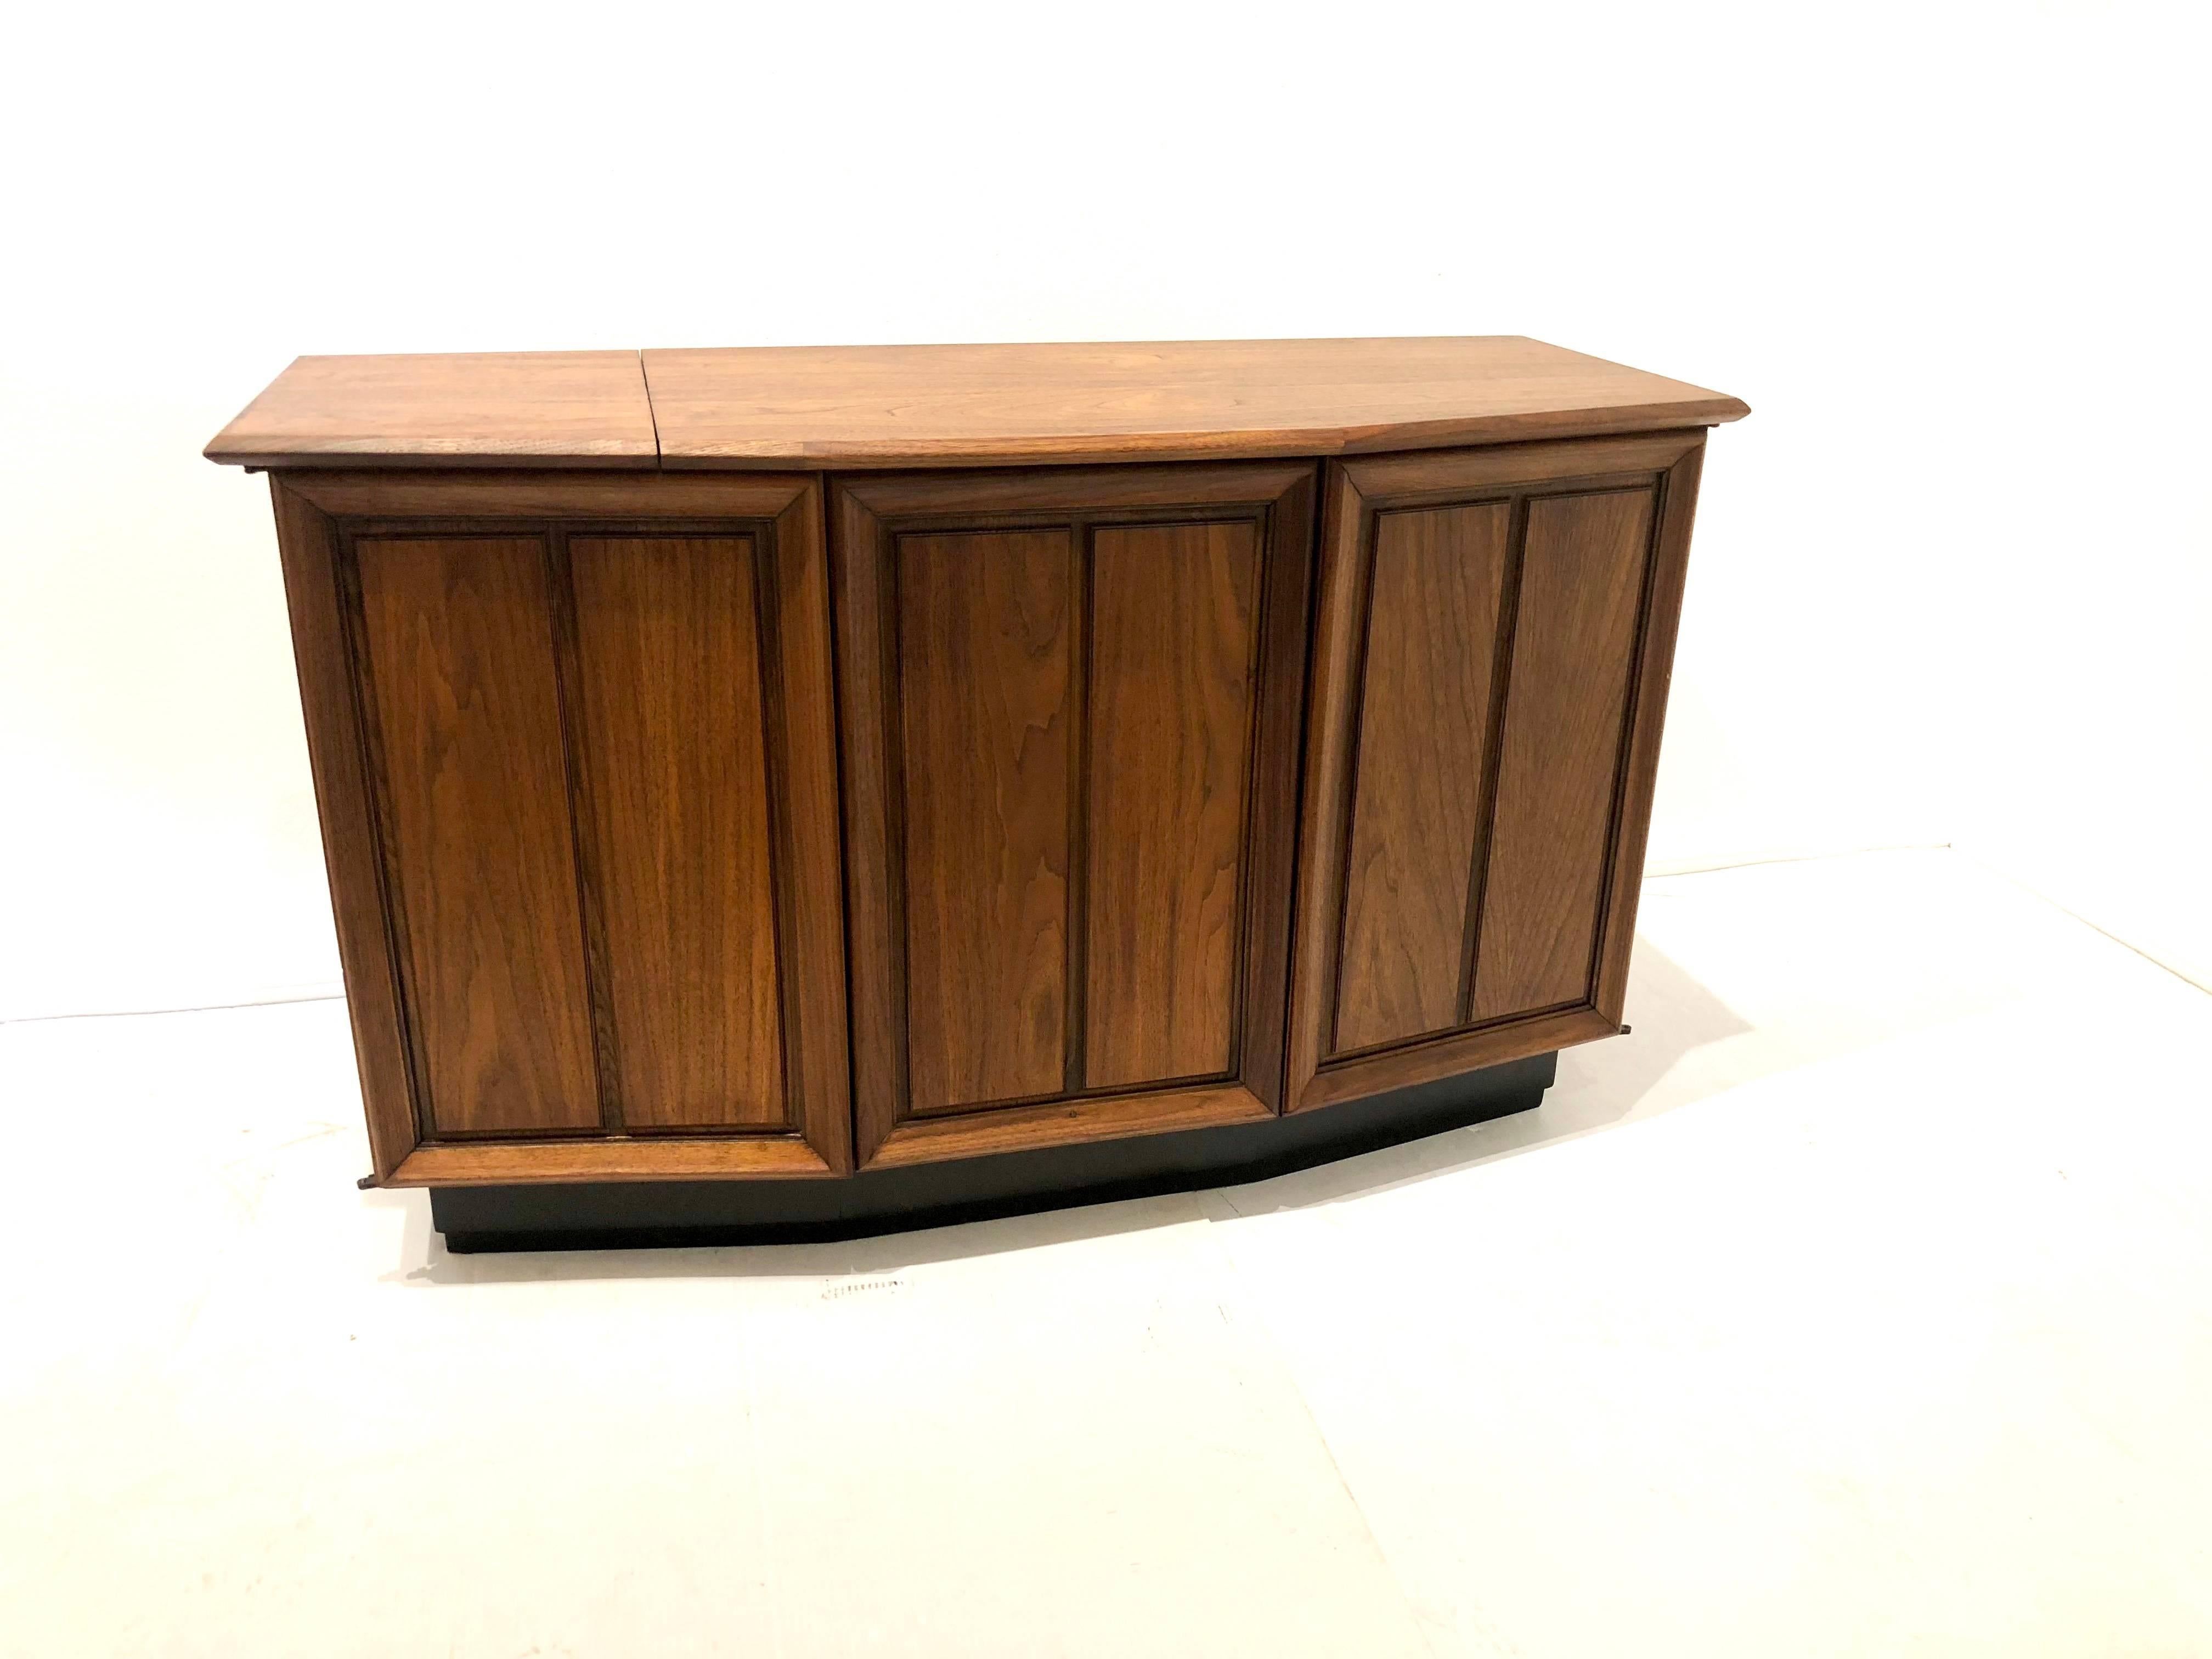 Totally restored American walnut stereo cabinet by Fisher, circa 1960s, dual turntable and fisher stereo receiver, with extra plug to connect your I phone or MP3 player, the item has been serviced and works great, it’s been taken all apart and